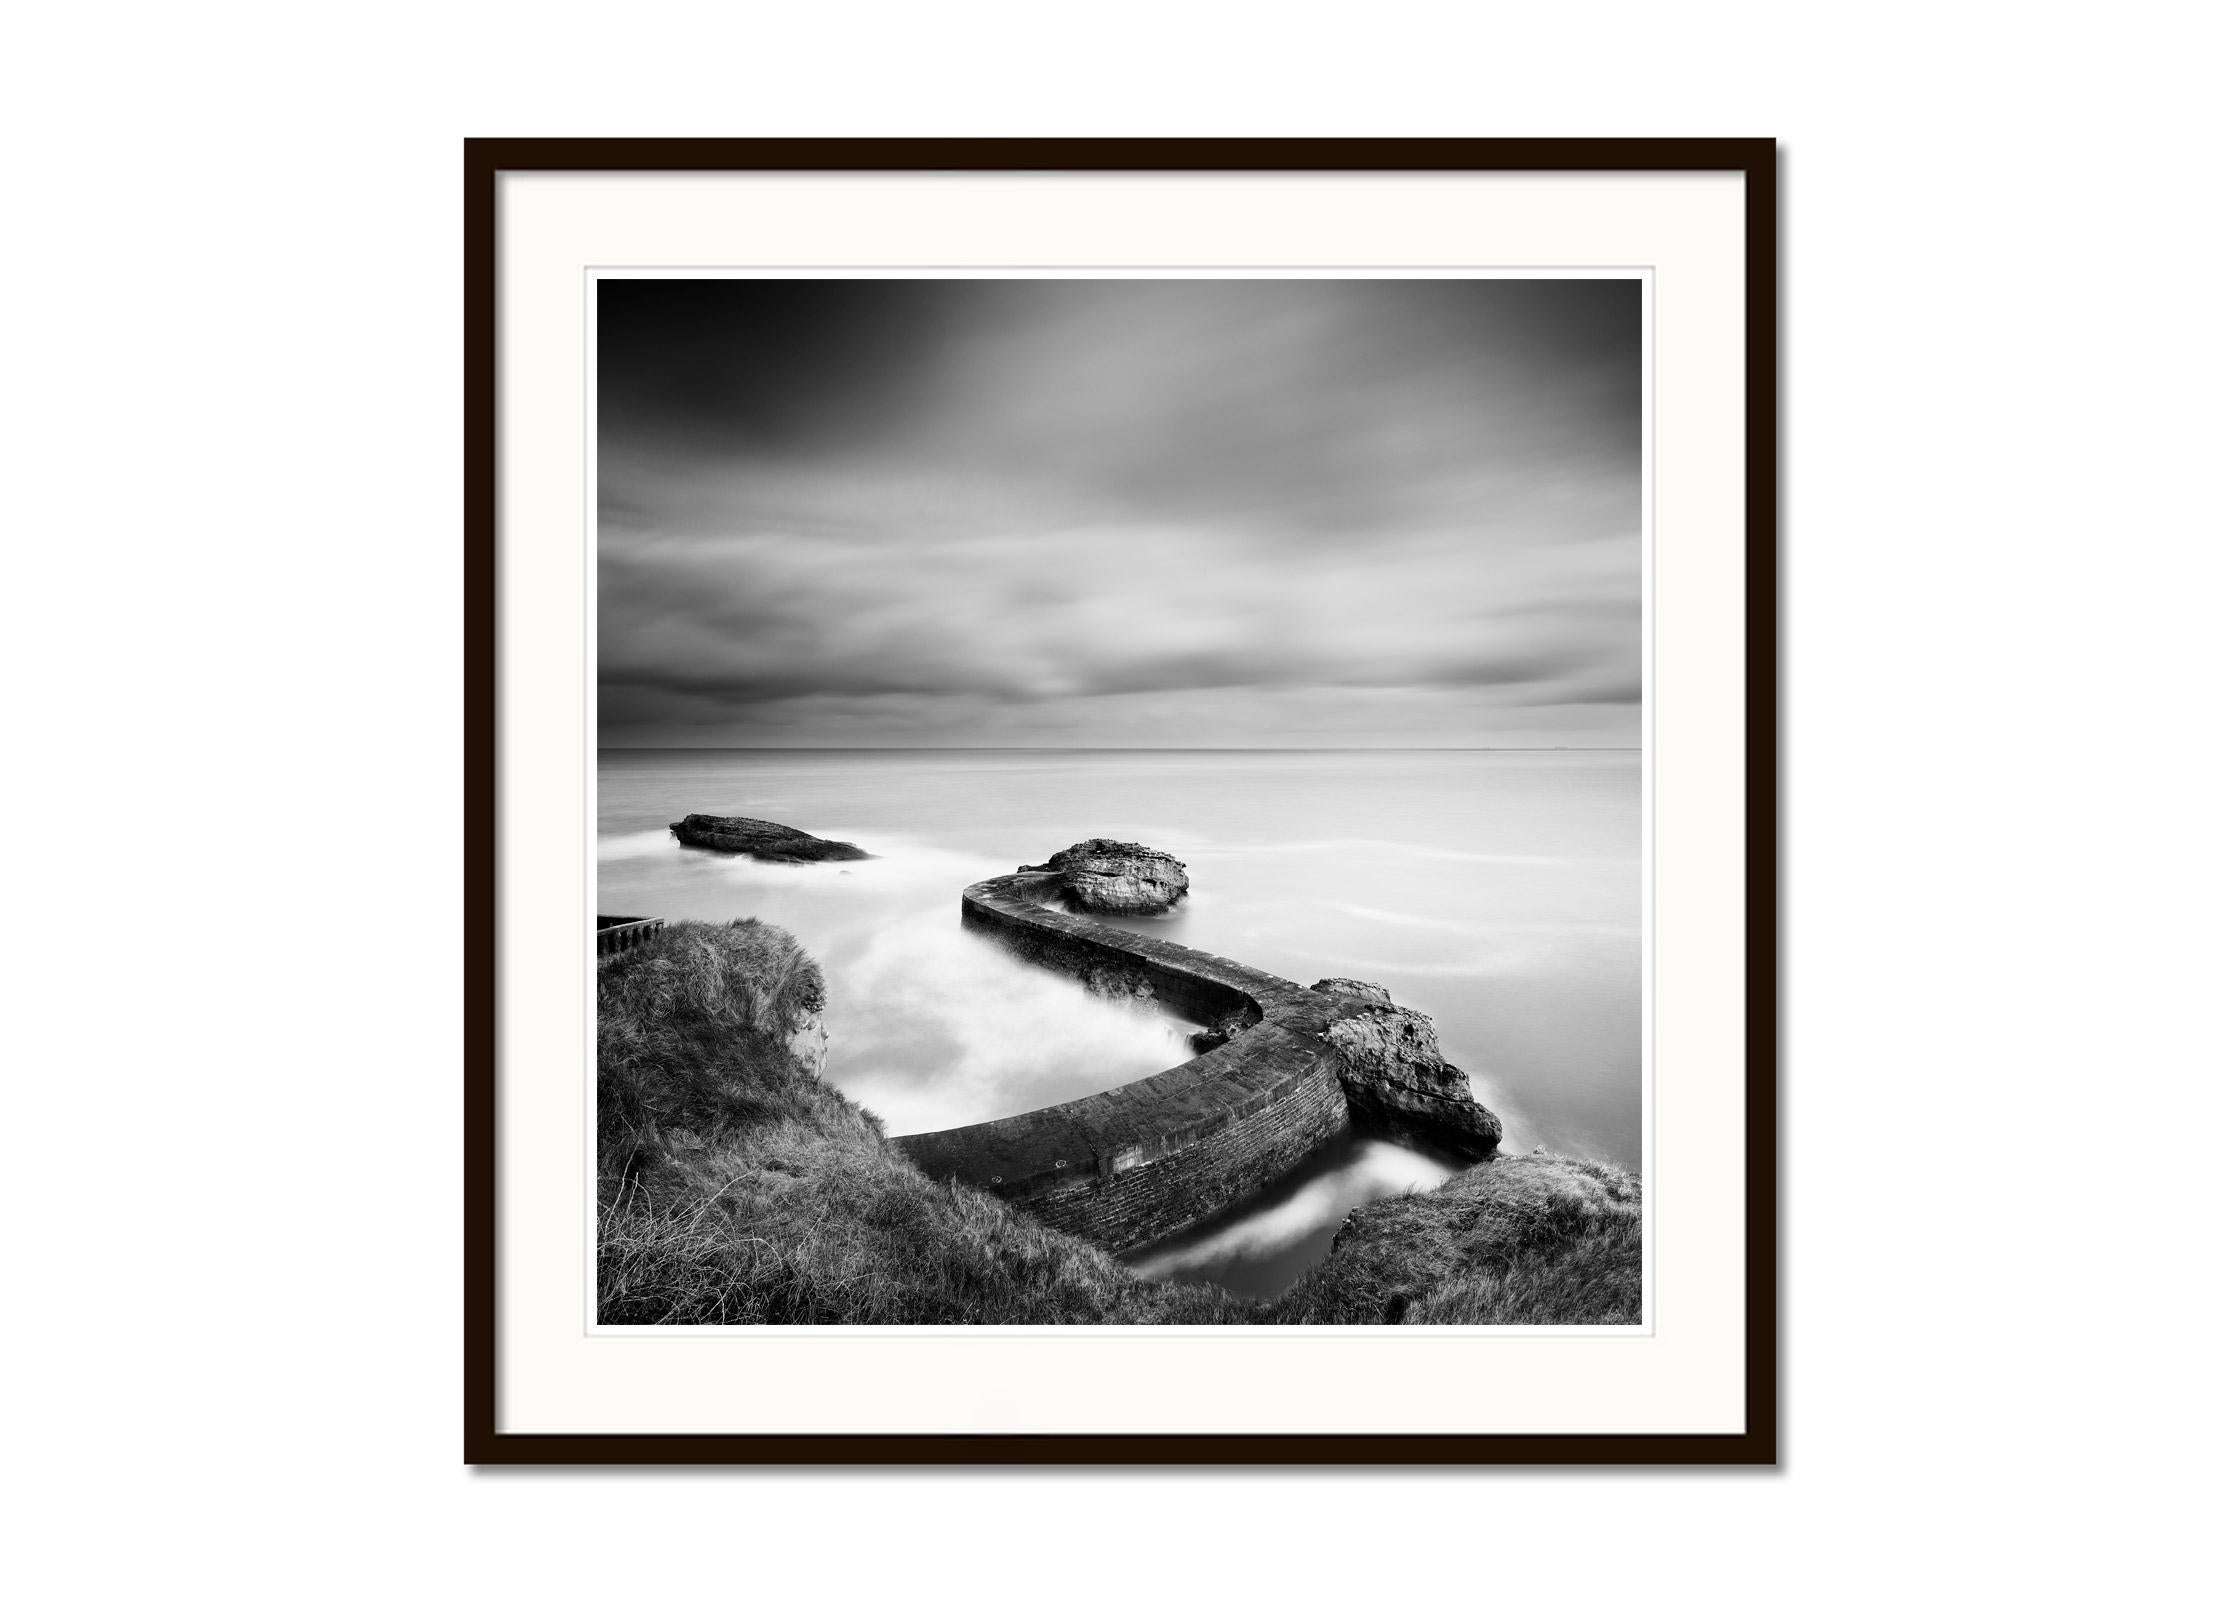 Black and white fine art long exposure waterscape photography print. Archival pigment ink print, edition of 7. Signed, titled, dated and numbered by artist. Certificate of authenticity included. Printed with 4cm white border.
International award